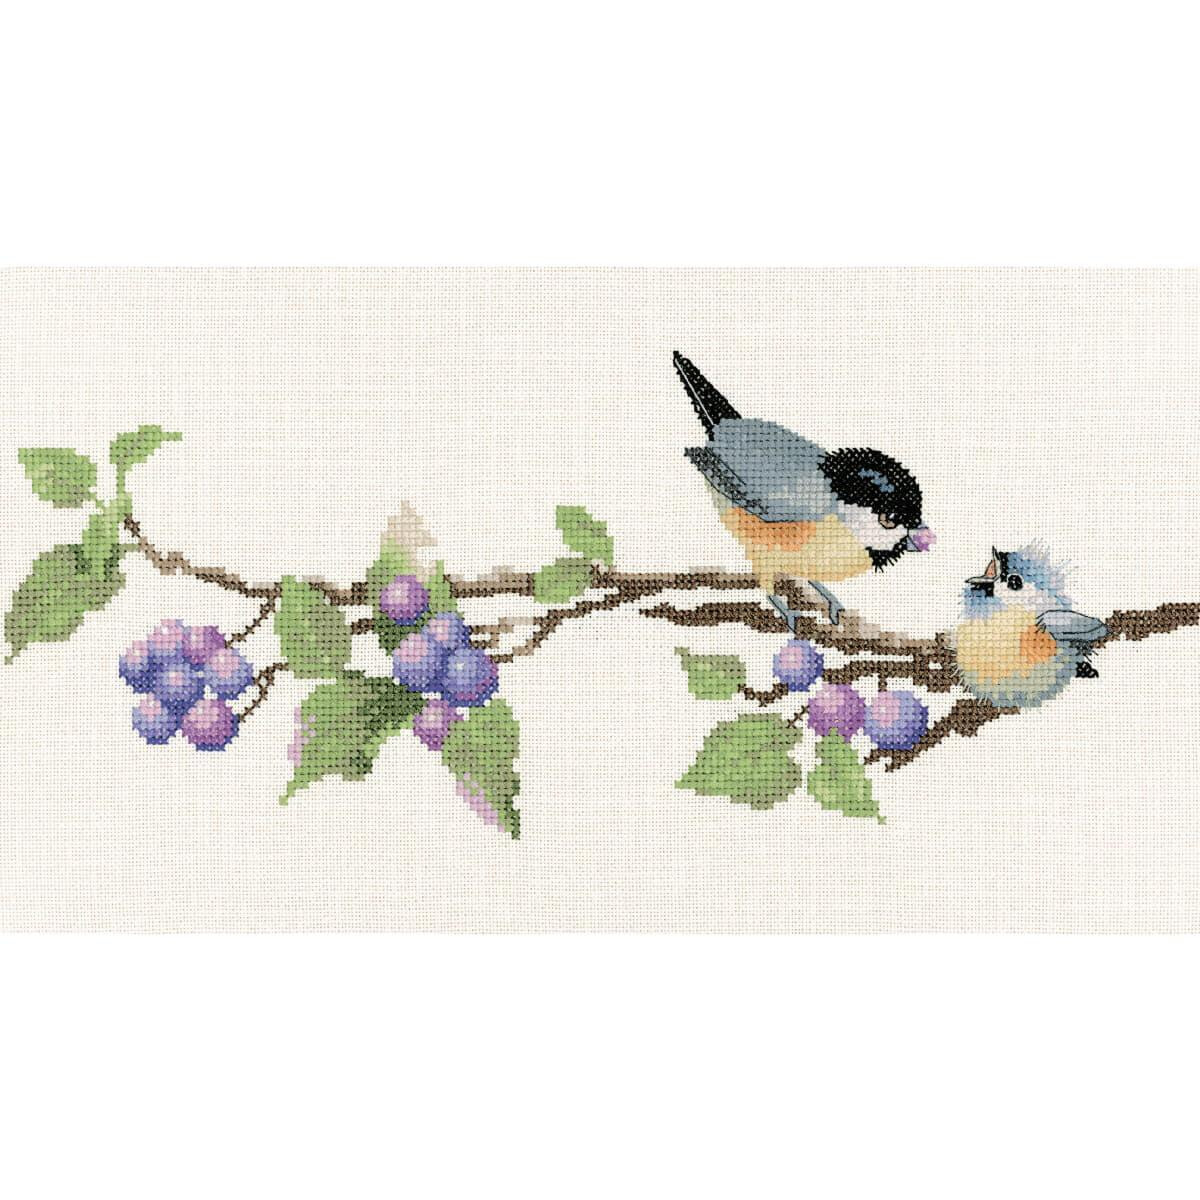 Heritage counted cross stitch kit Aida "Berry Time...